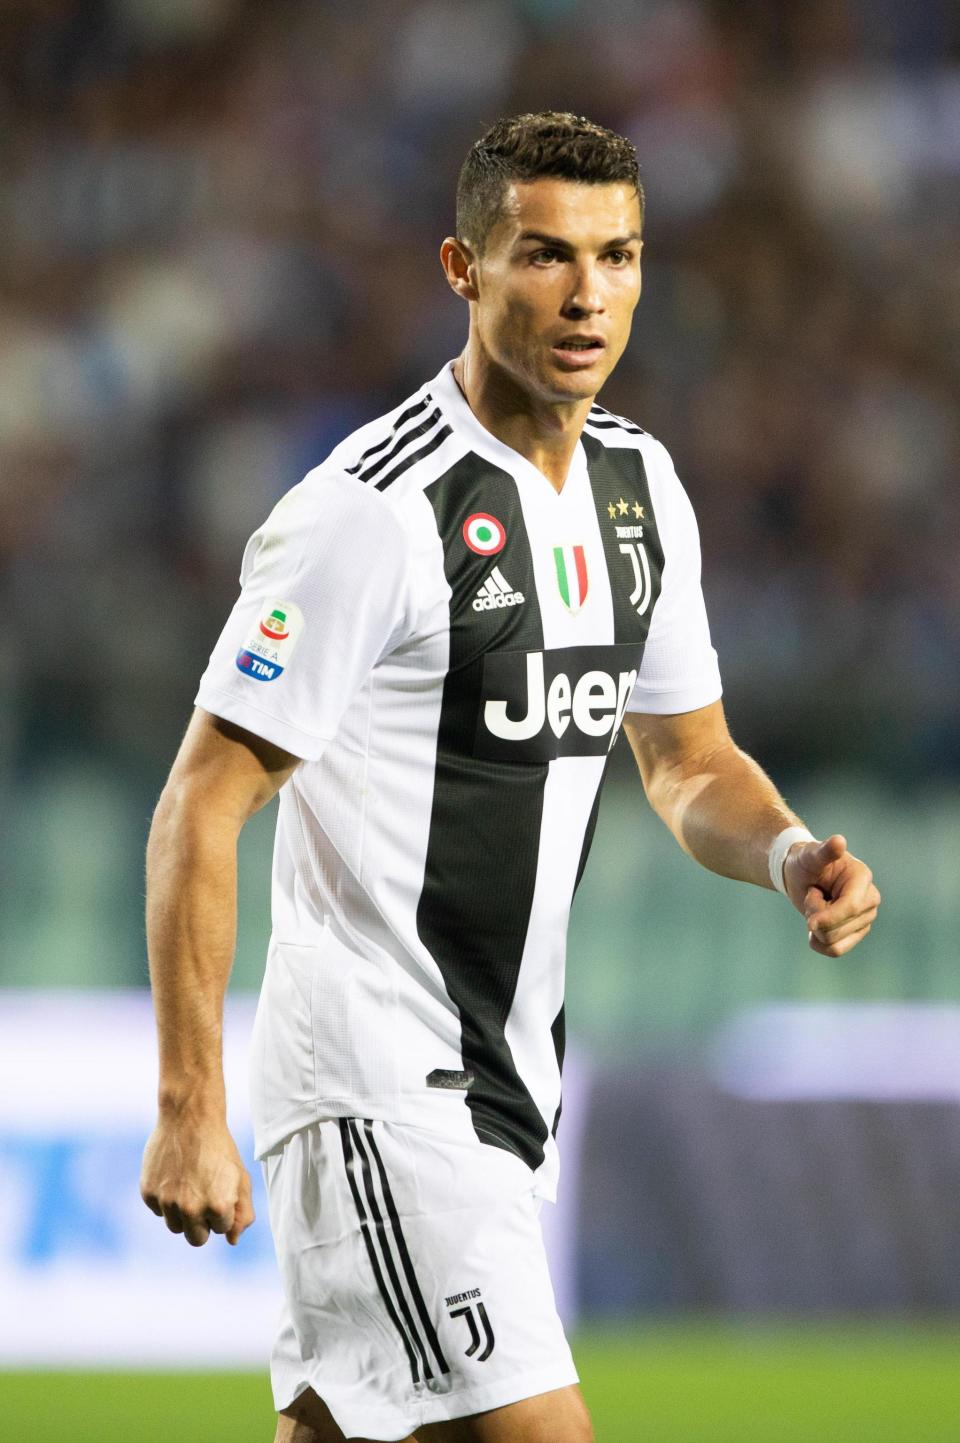 Juventus' Cristiano Ronaldo walks on the pitch during the Serie A soccer match between Empoli and Juventus at the Carlo Castellani stadium in Empoli, Italy, Saturday, Oct. 27, 2018. (Gianni Nucci/ANSA via AP)